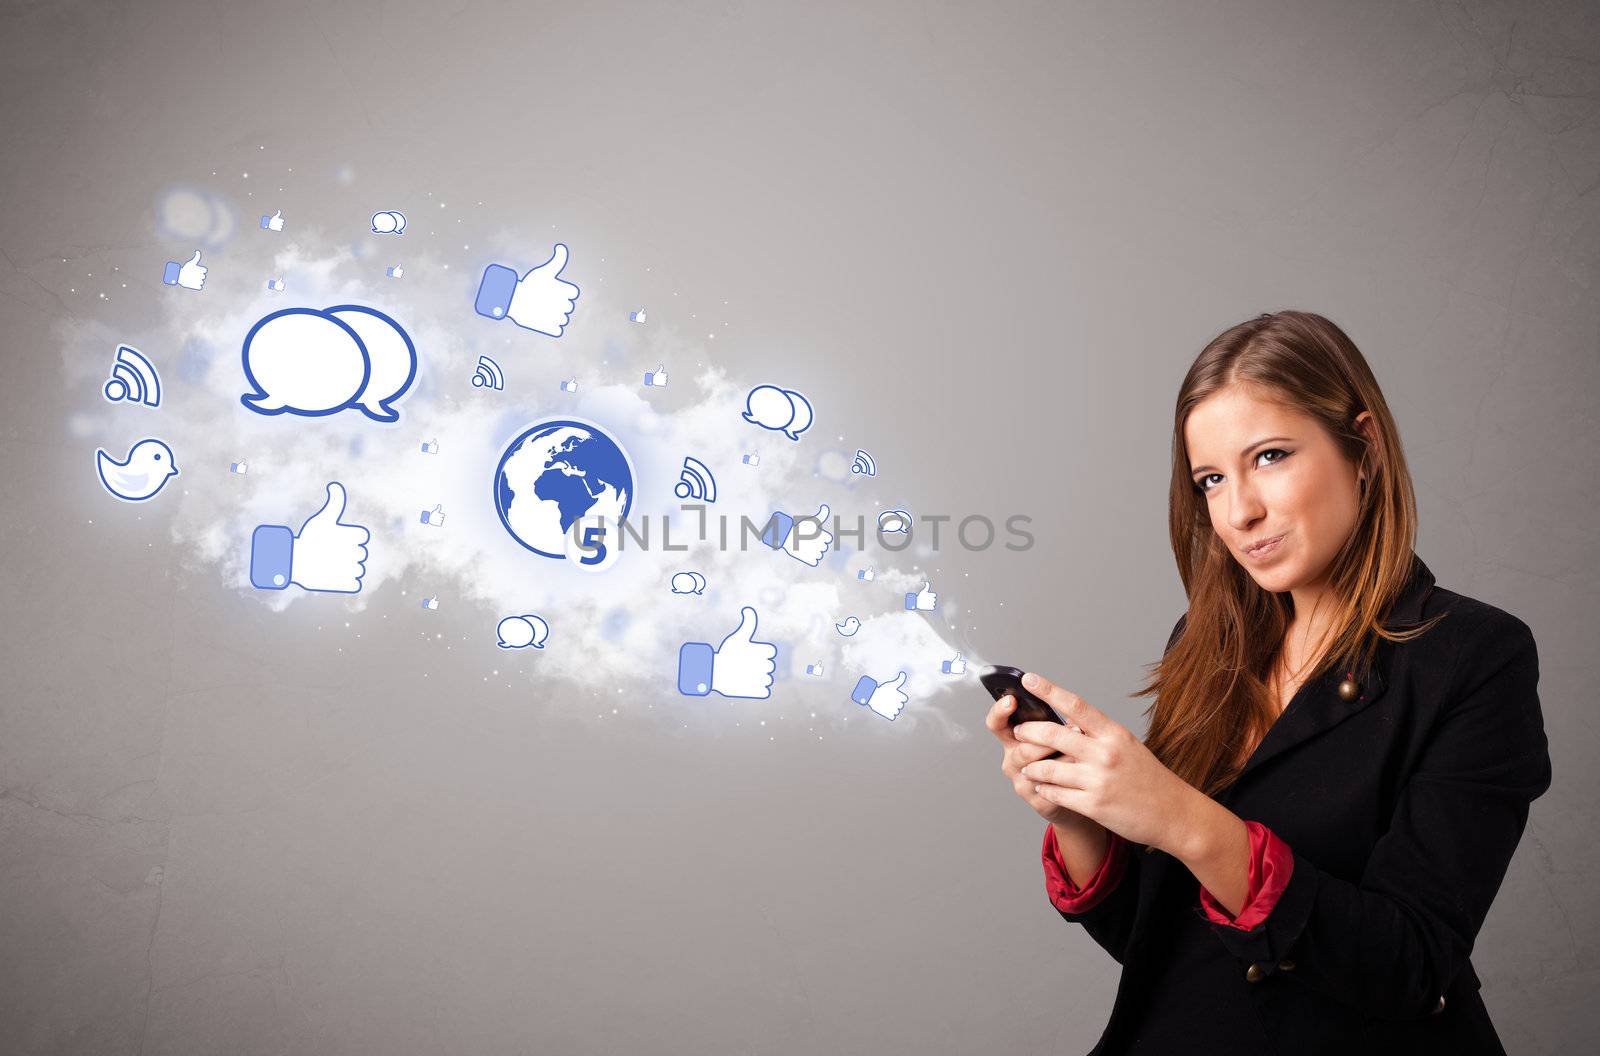 Pretty young girl holding a phone with social media icons in abstract cloud